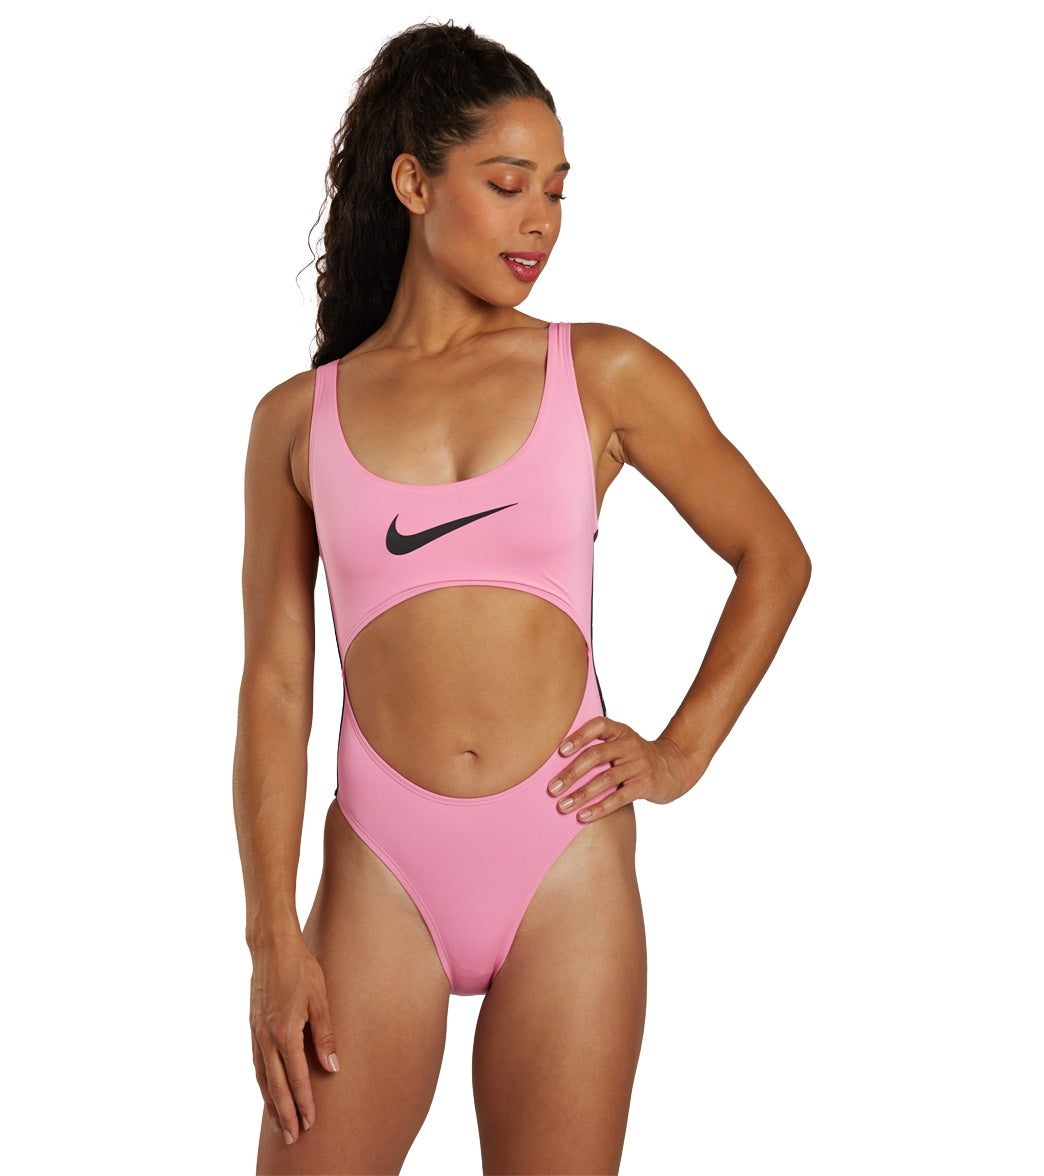 Nike Women's Cut-Out Tank One Piece Swimsuit at SwimOutlet.com